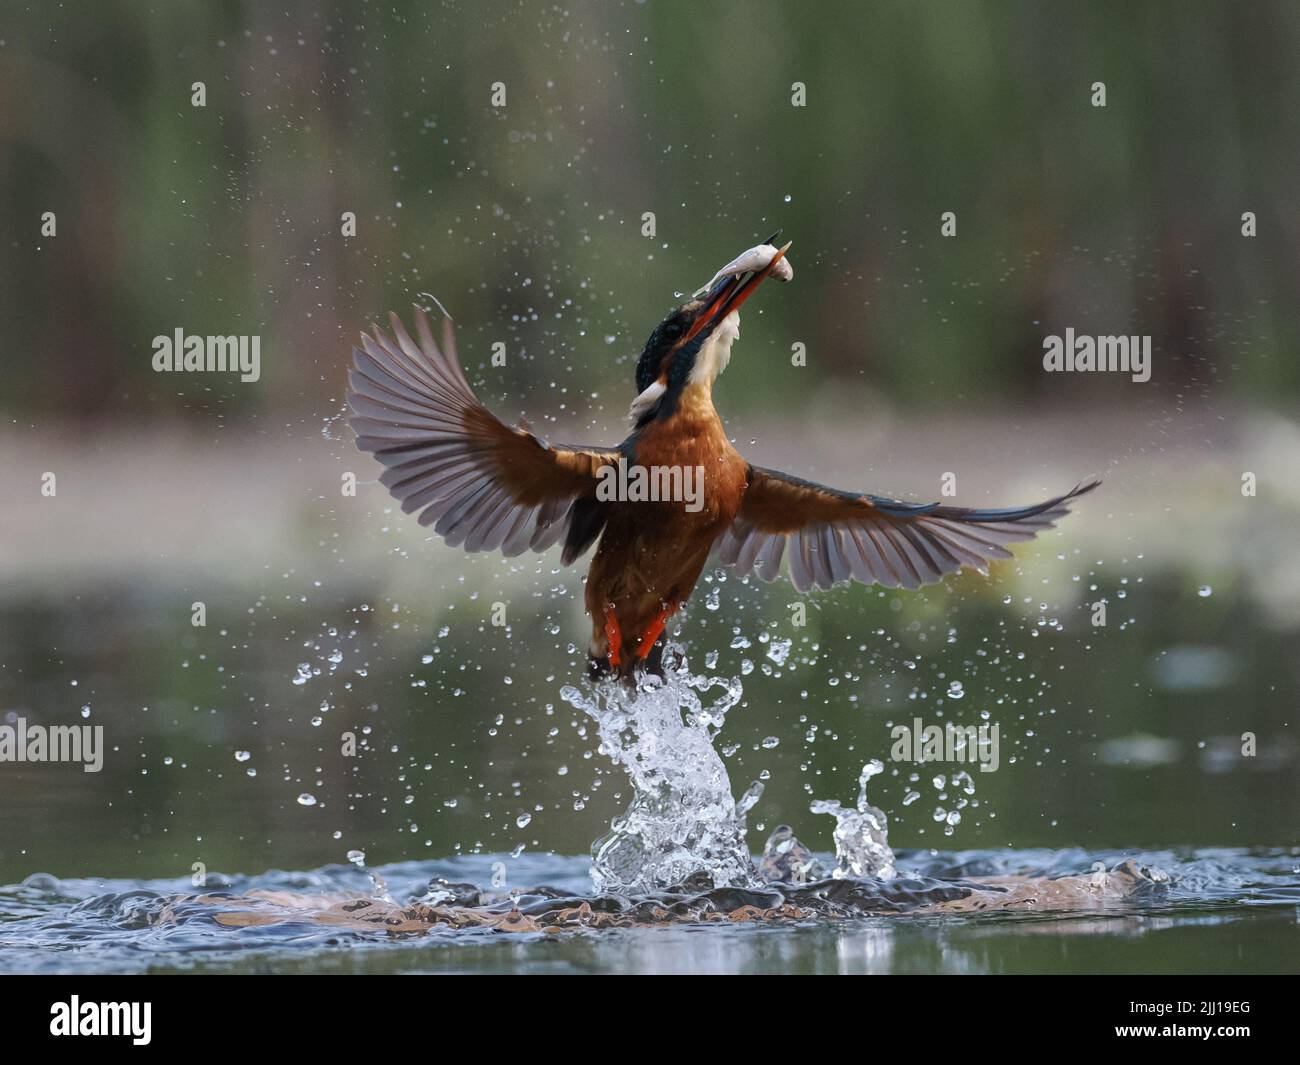 The kingfisher emerges. UK: THESE BEAUTIFUL images mark a momentous occasion for this blind photographer as he finally achieves his dream show, captur Stock Photo